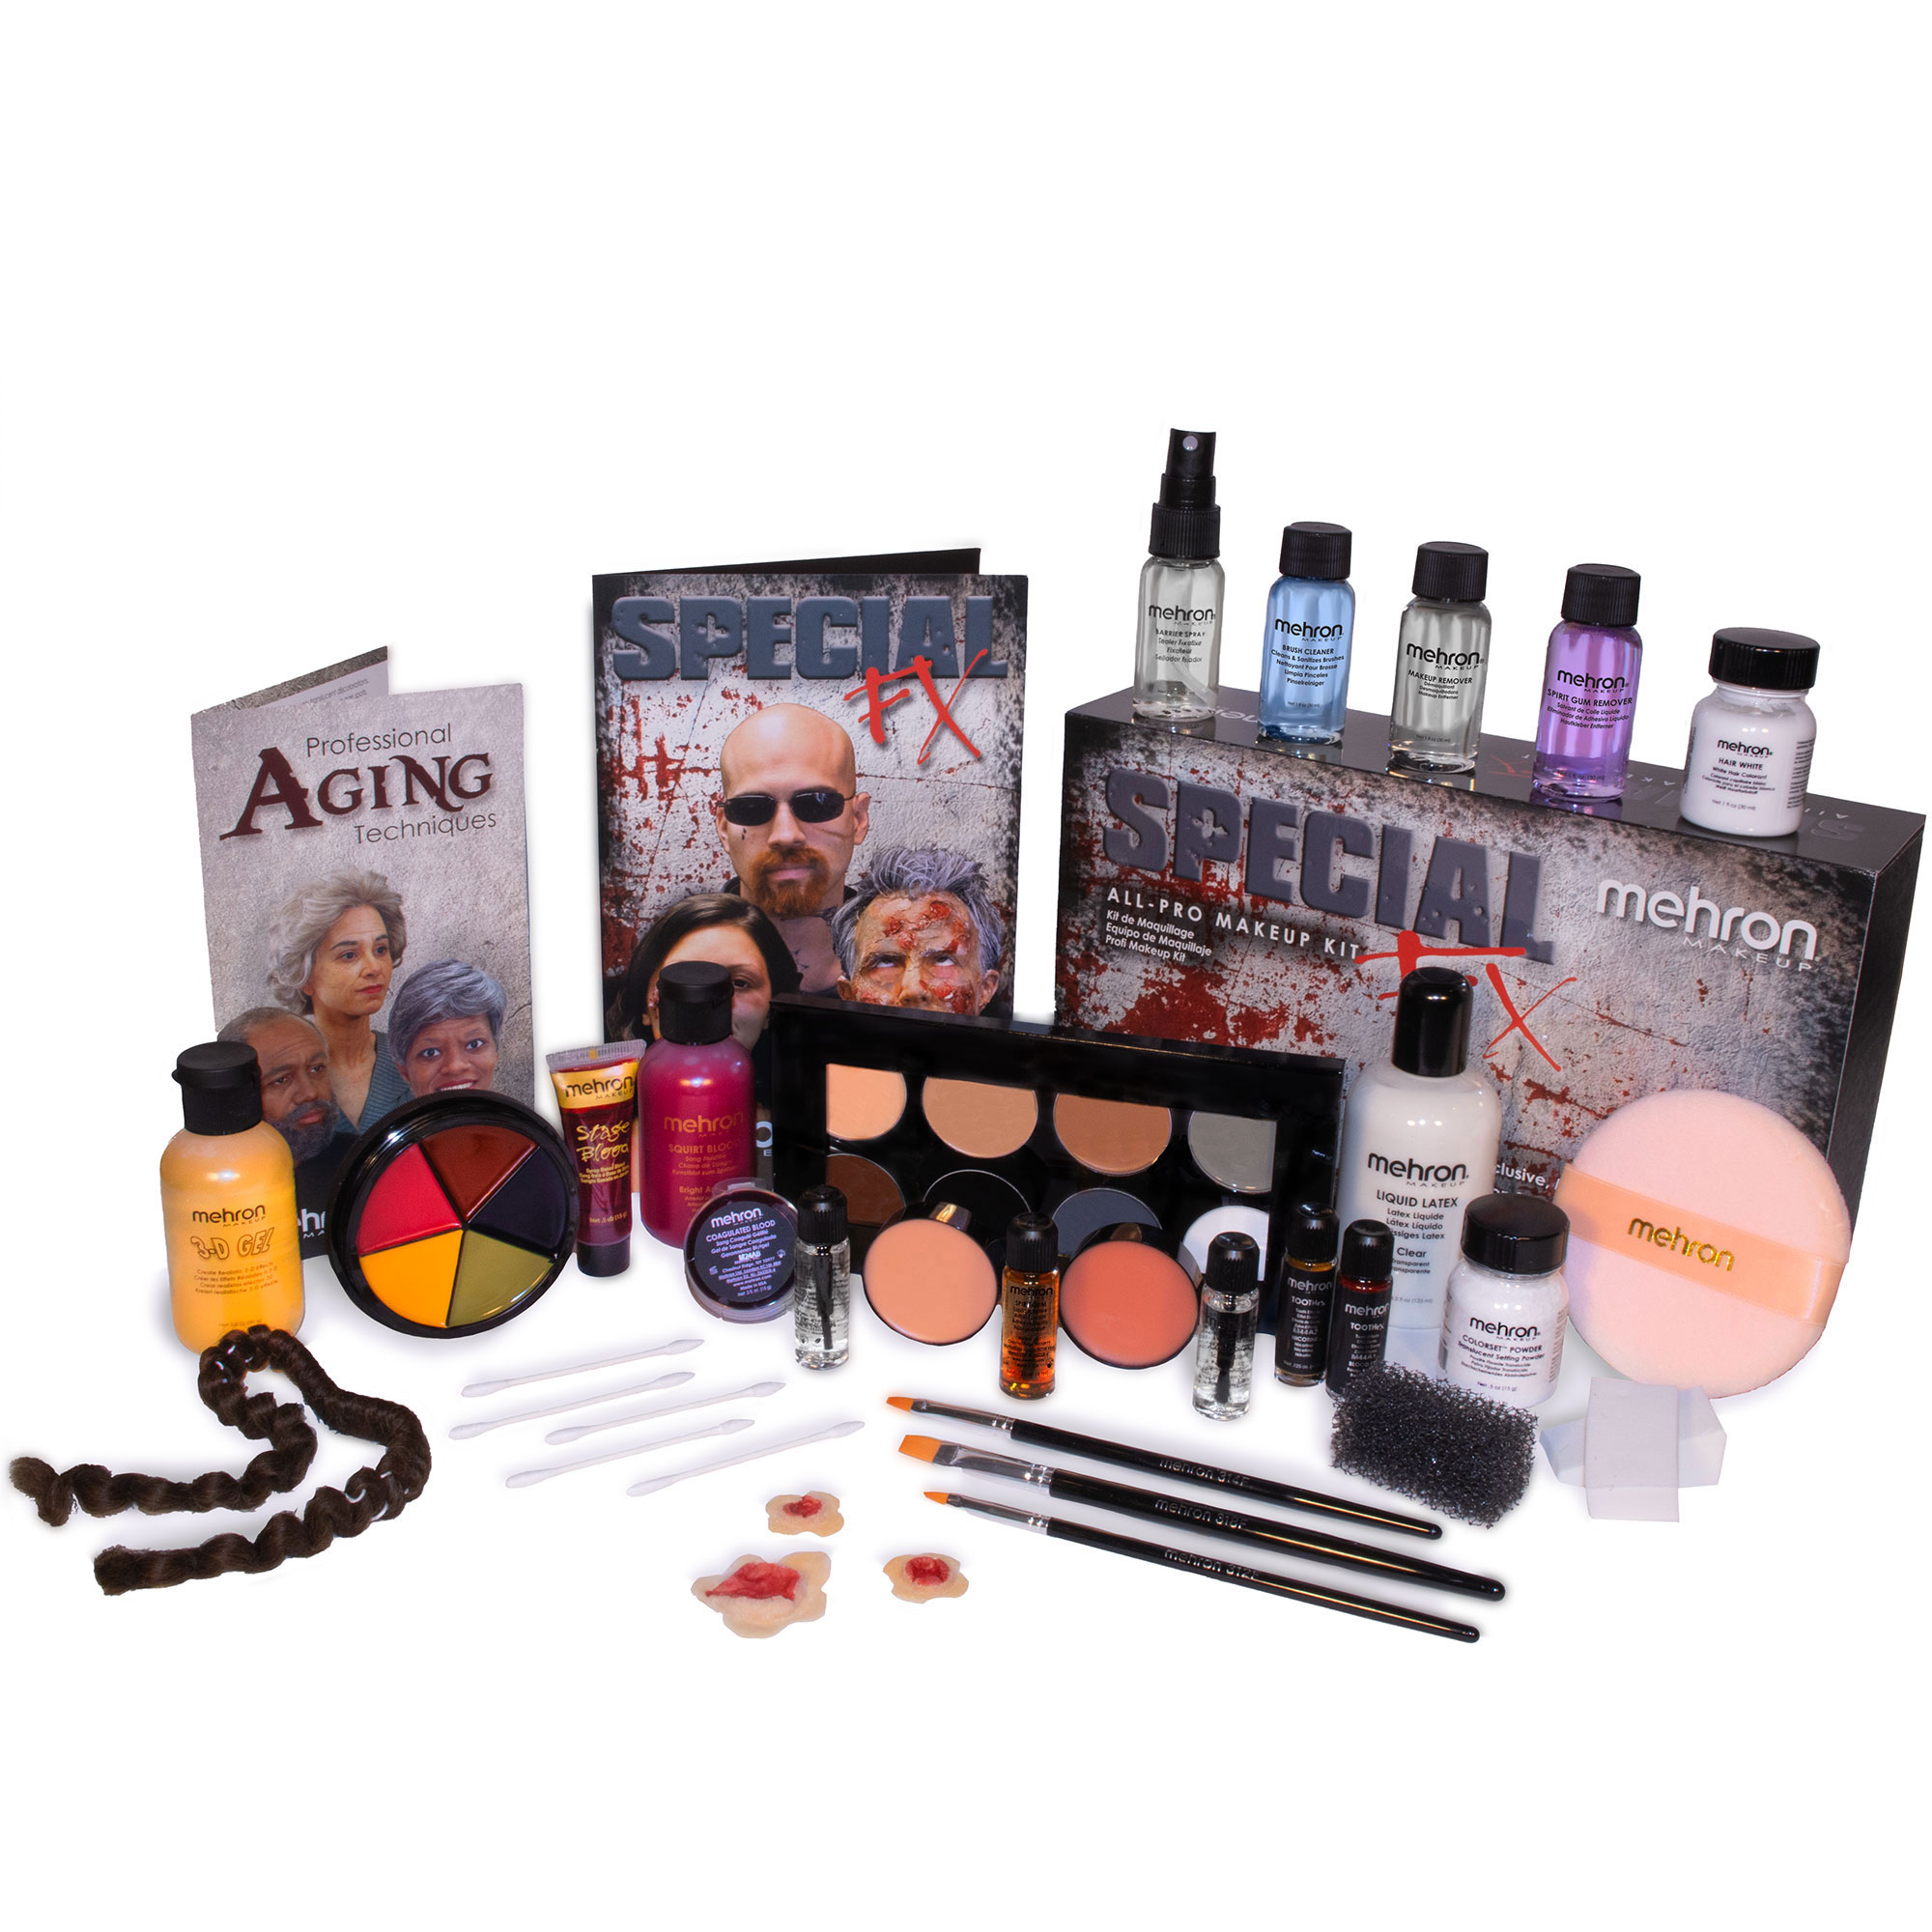 Mehron Makeup Paradise Makeup AQ Pro Size | Stage & Screen, Face & Body  Painting, Special FX, Beauty, Cosplay, and Halloween | Water Activated Face